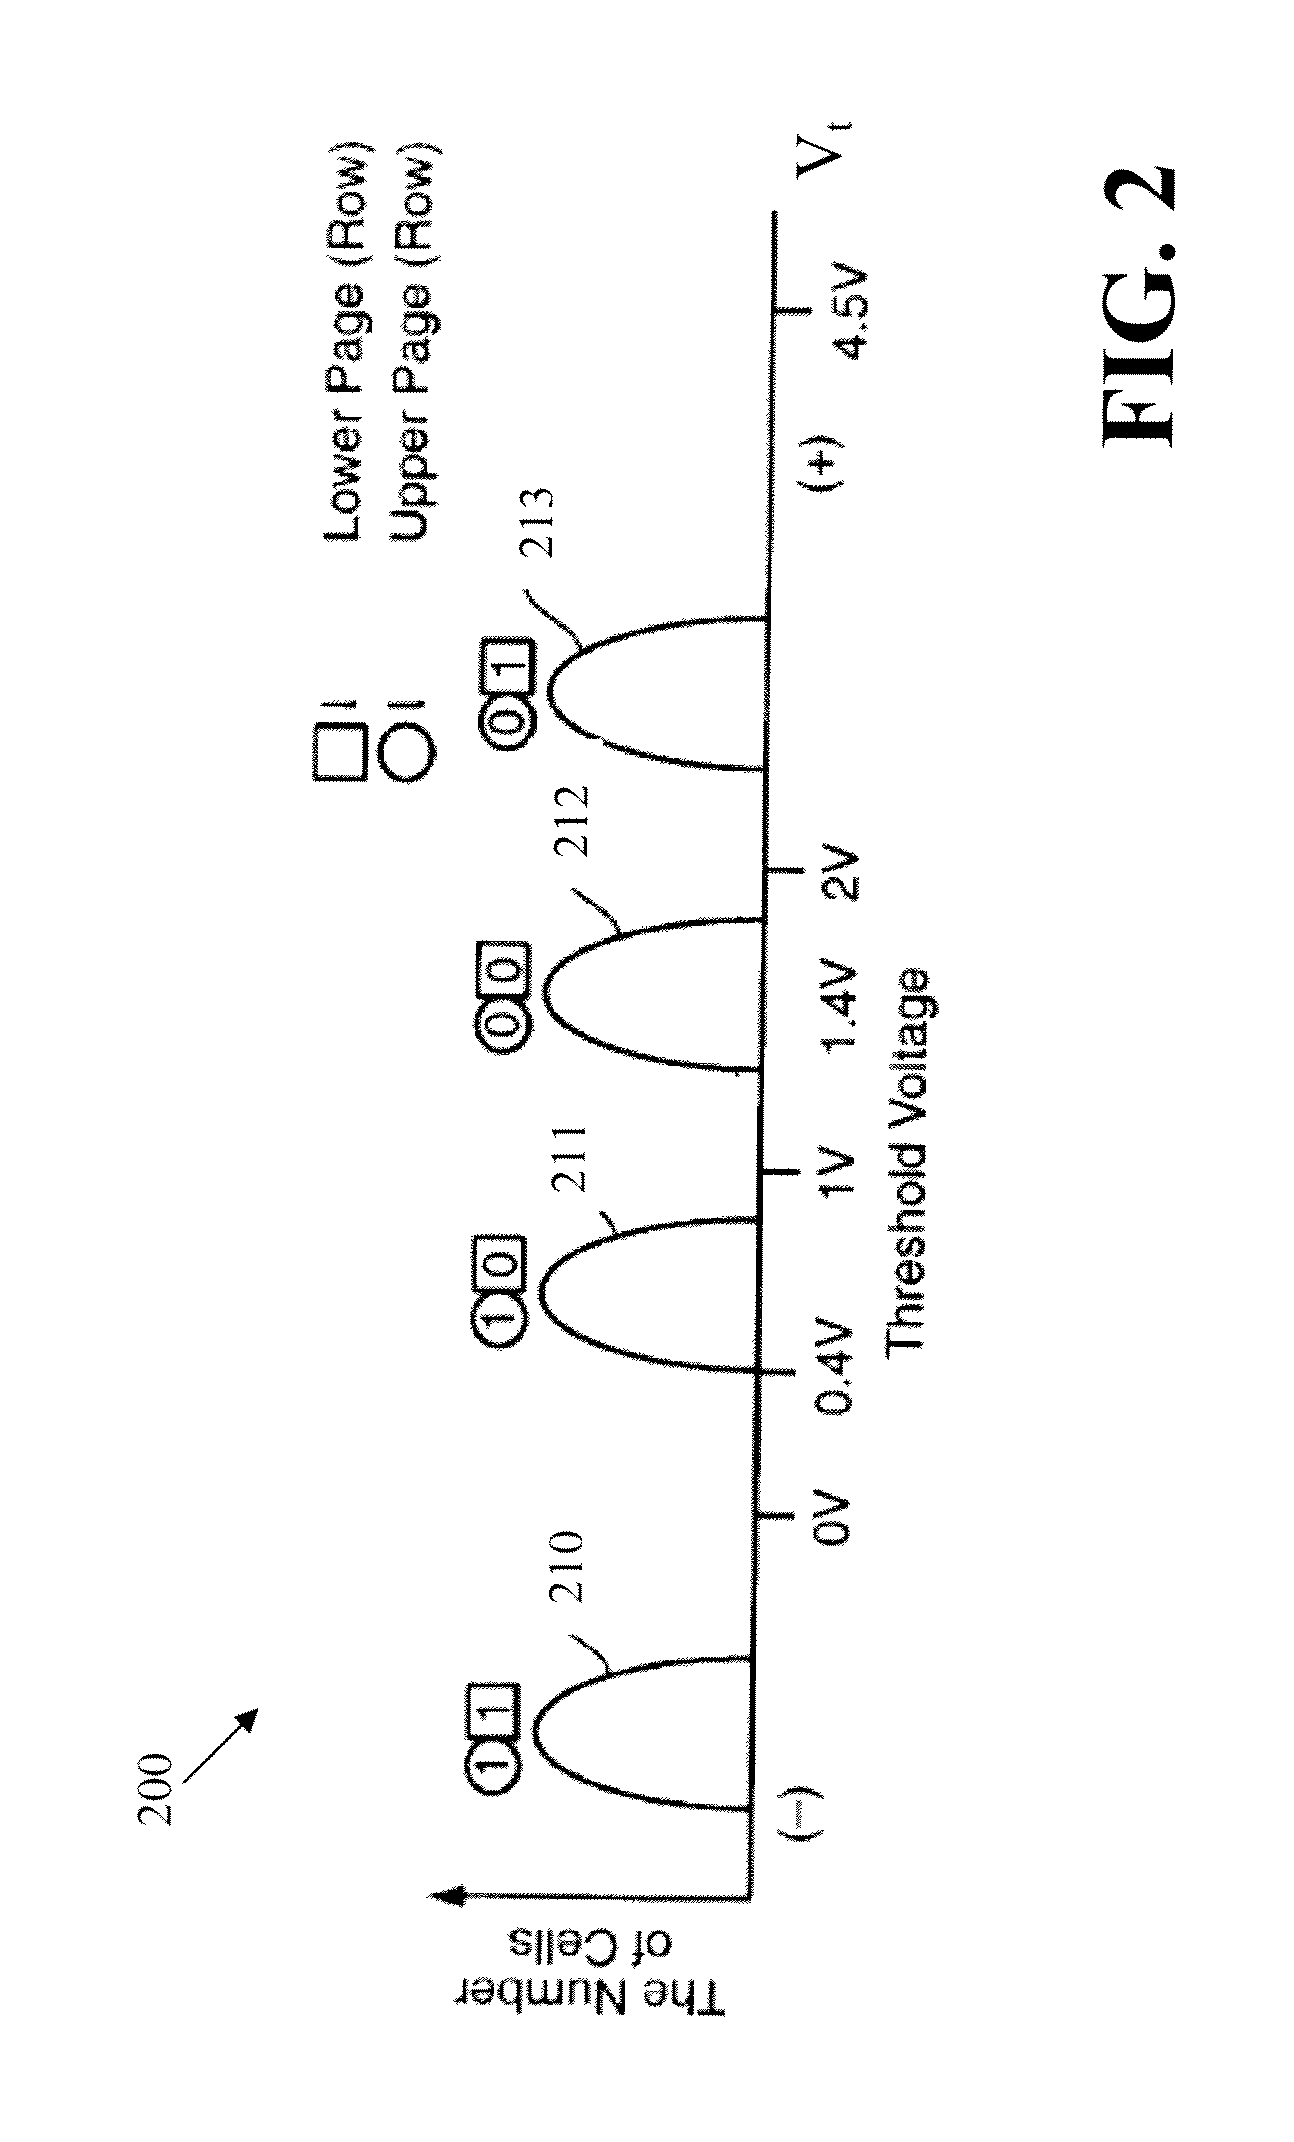 Methods and apparatus for computing soft data or log likelihood ratios for received values in communication or storage systems